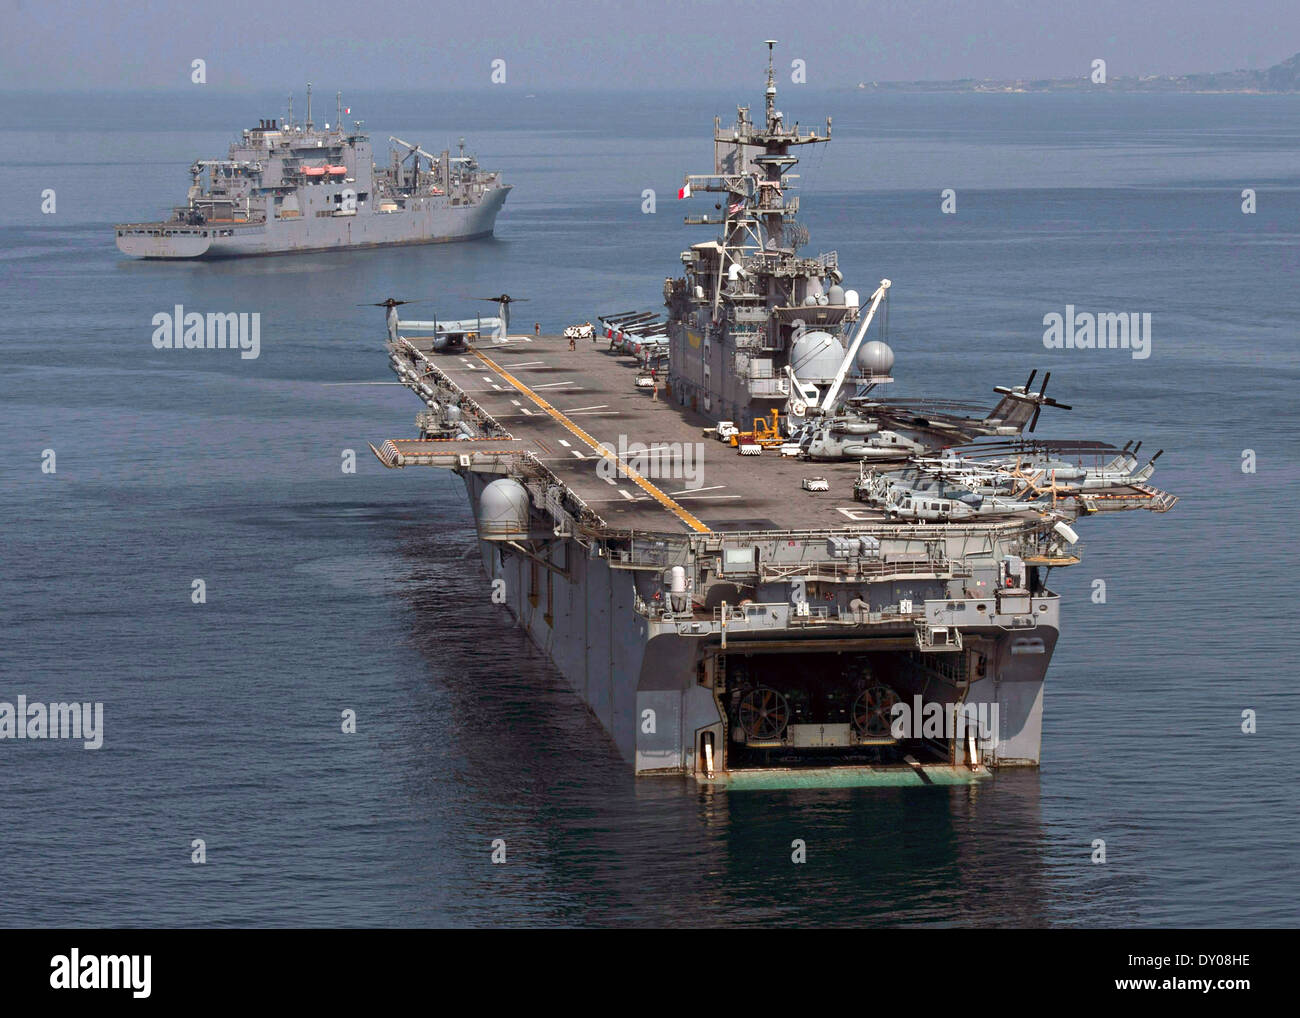 US Navy amphibious assault ship USS Bonhomme Richard sits at anchorage alongside the Military Sealift Command dry cargo and ammunition ship USNS Sacagawea during an exercise Ssang Yong March 30, 2014 off the coast of Doksu-Ri, Pohang, South Korea. Stock Photo